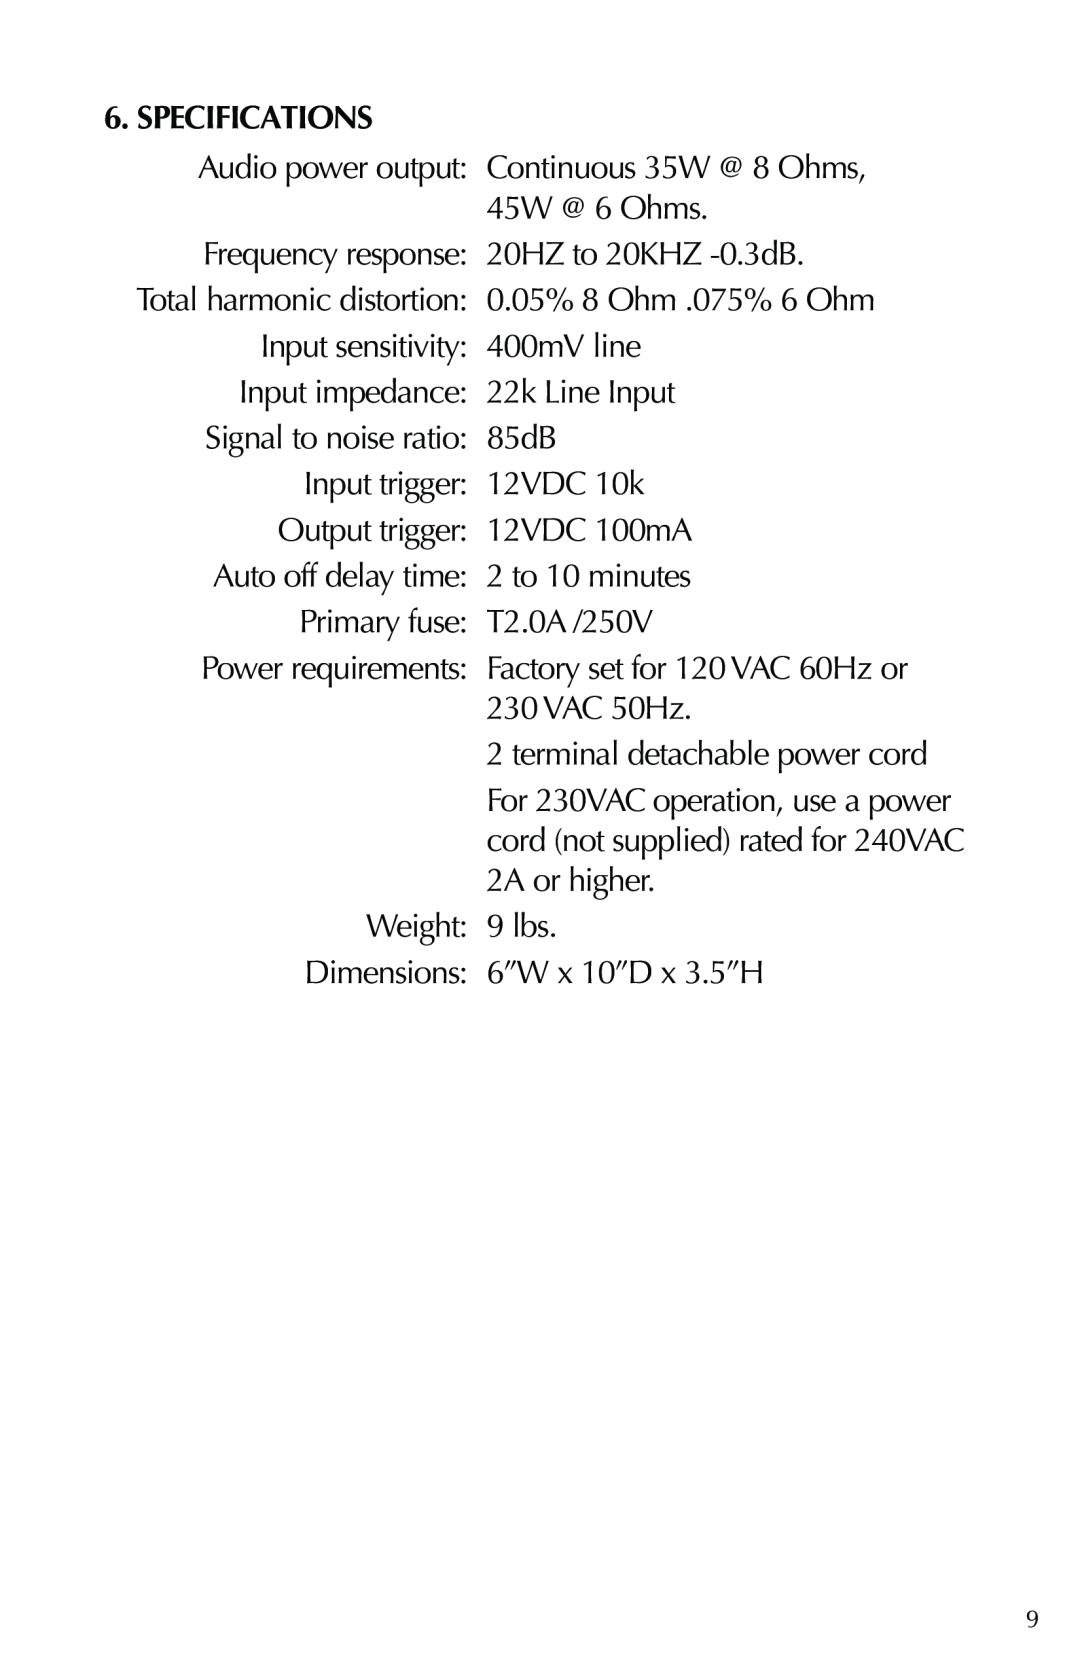 Russound DPA-1.2 instruction manual Specifications 